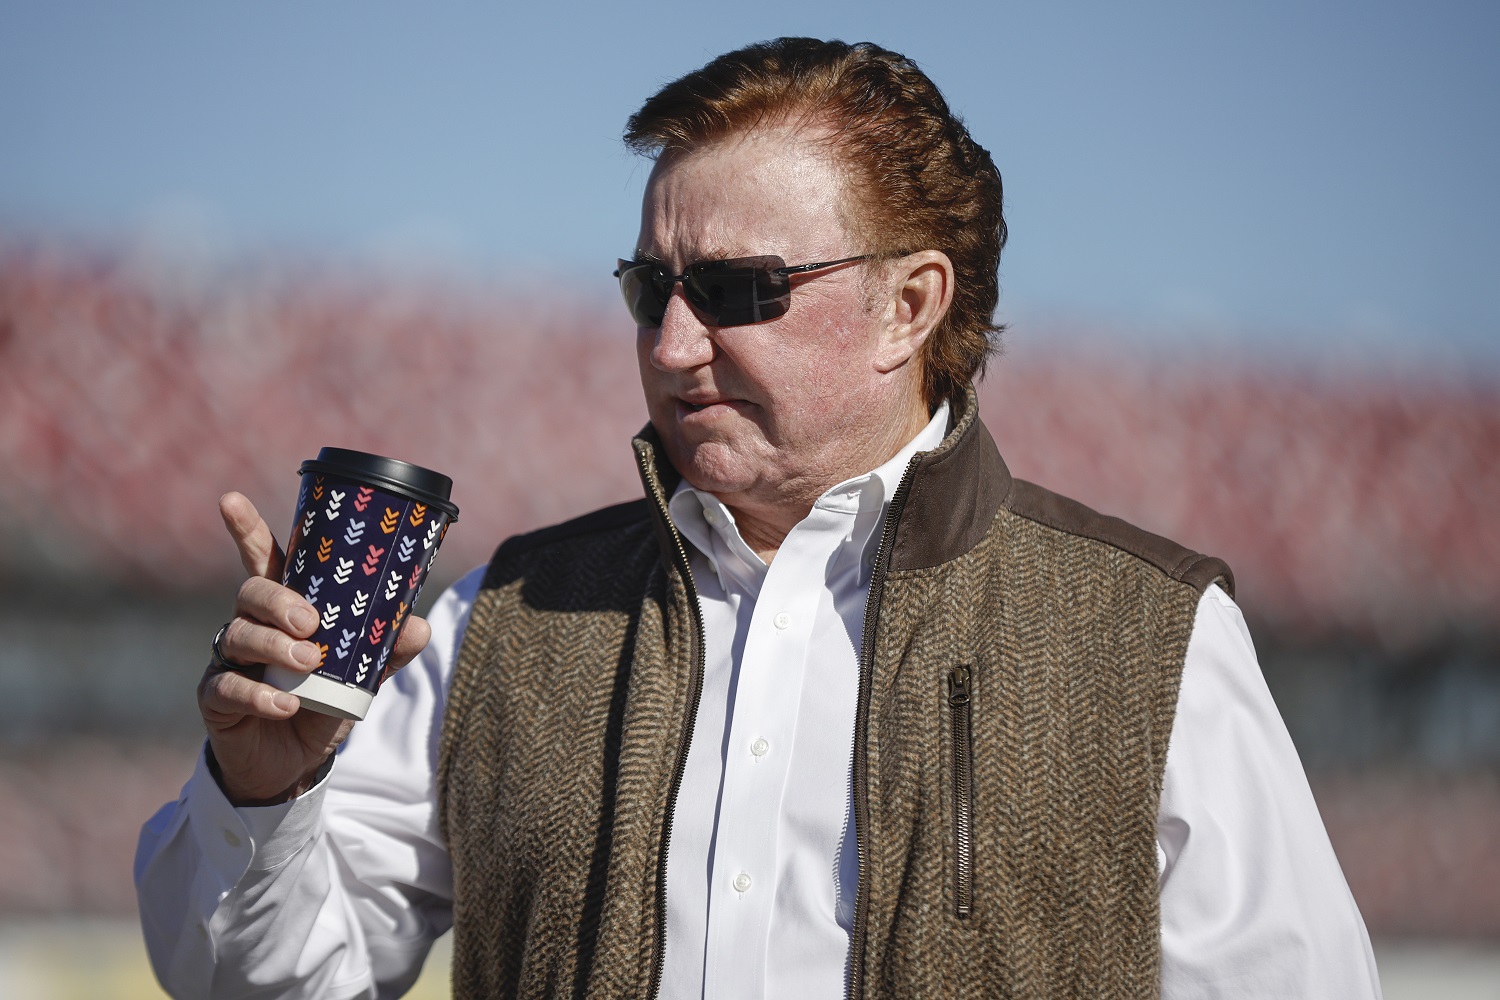 RCR team owner and NASCAR Hall of Famer Richard Childress walks the grid during qualifying for the NASCAR Cup Series YellaWood 500 at Talladega Superspeedway on Oct. 1, 2022.